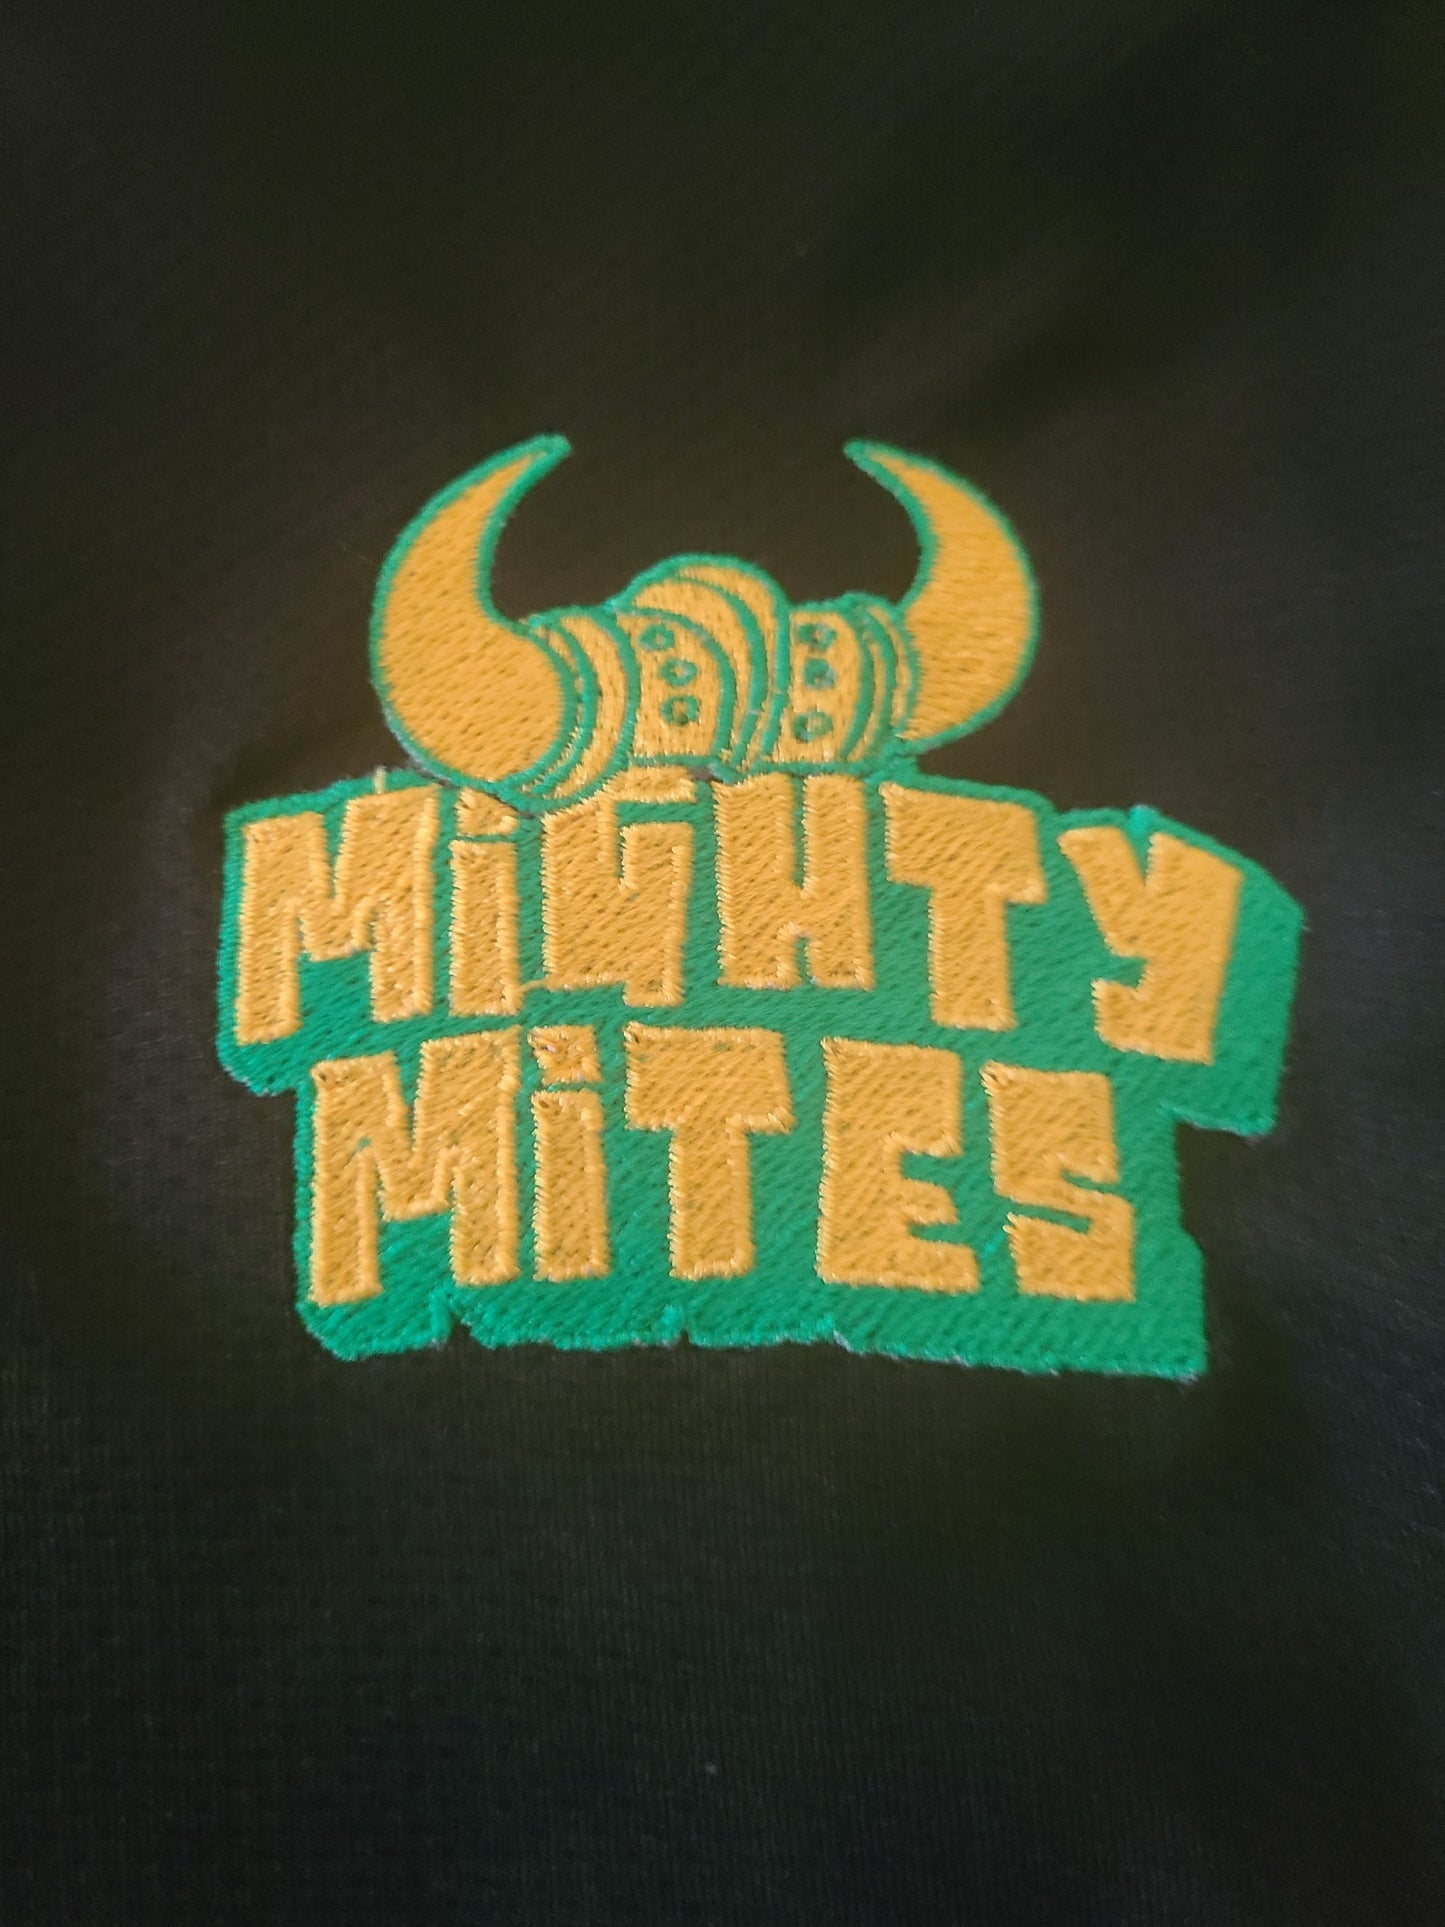 Men's Embroidered Full-Zip Mighty Mite Hoodie